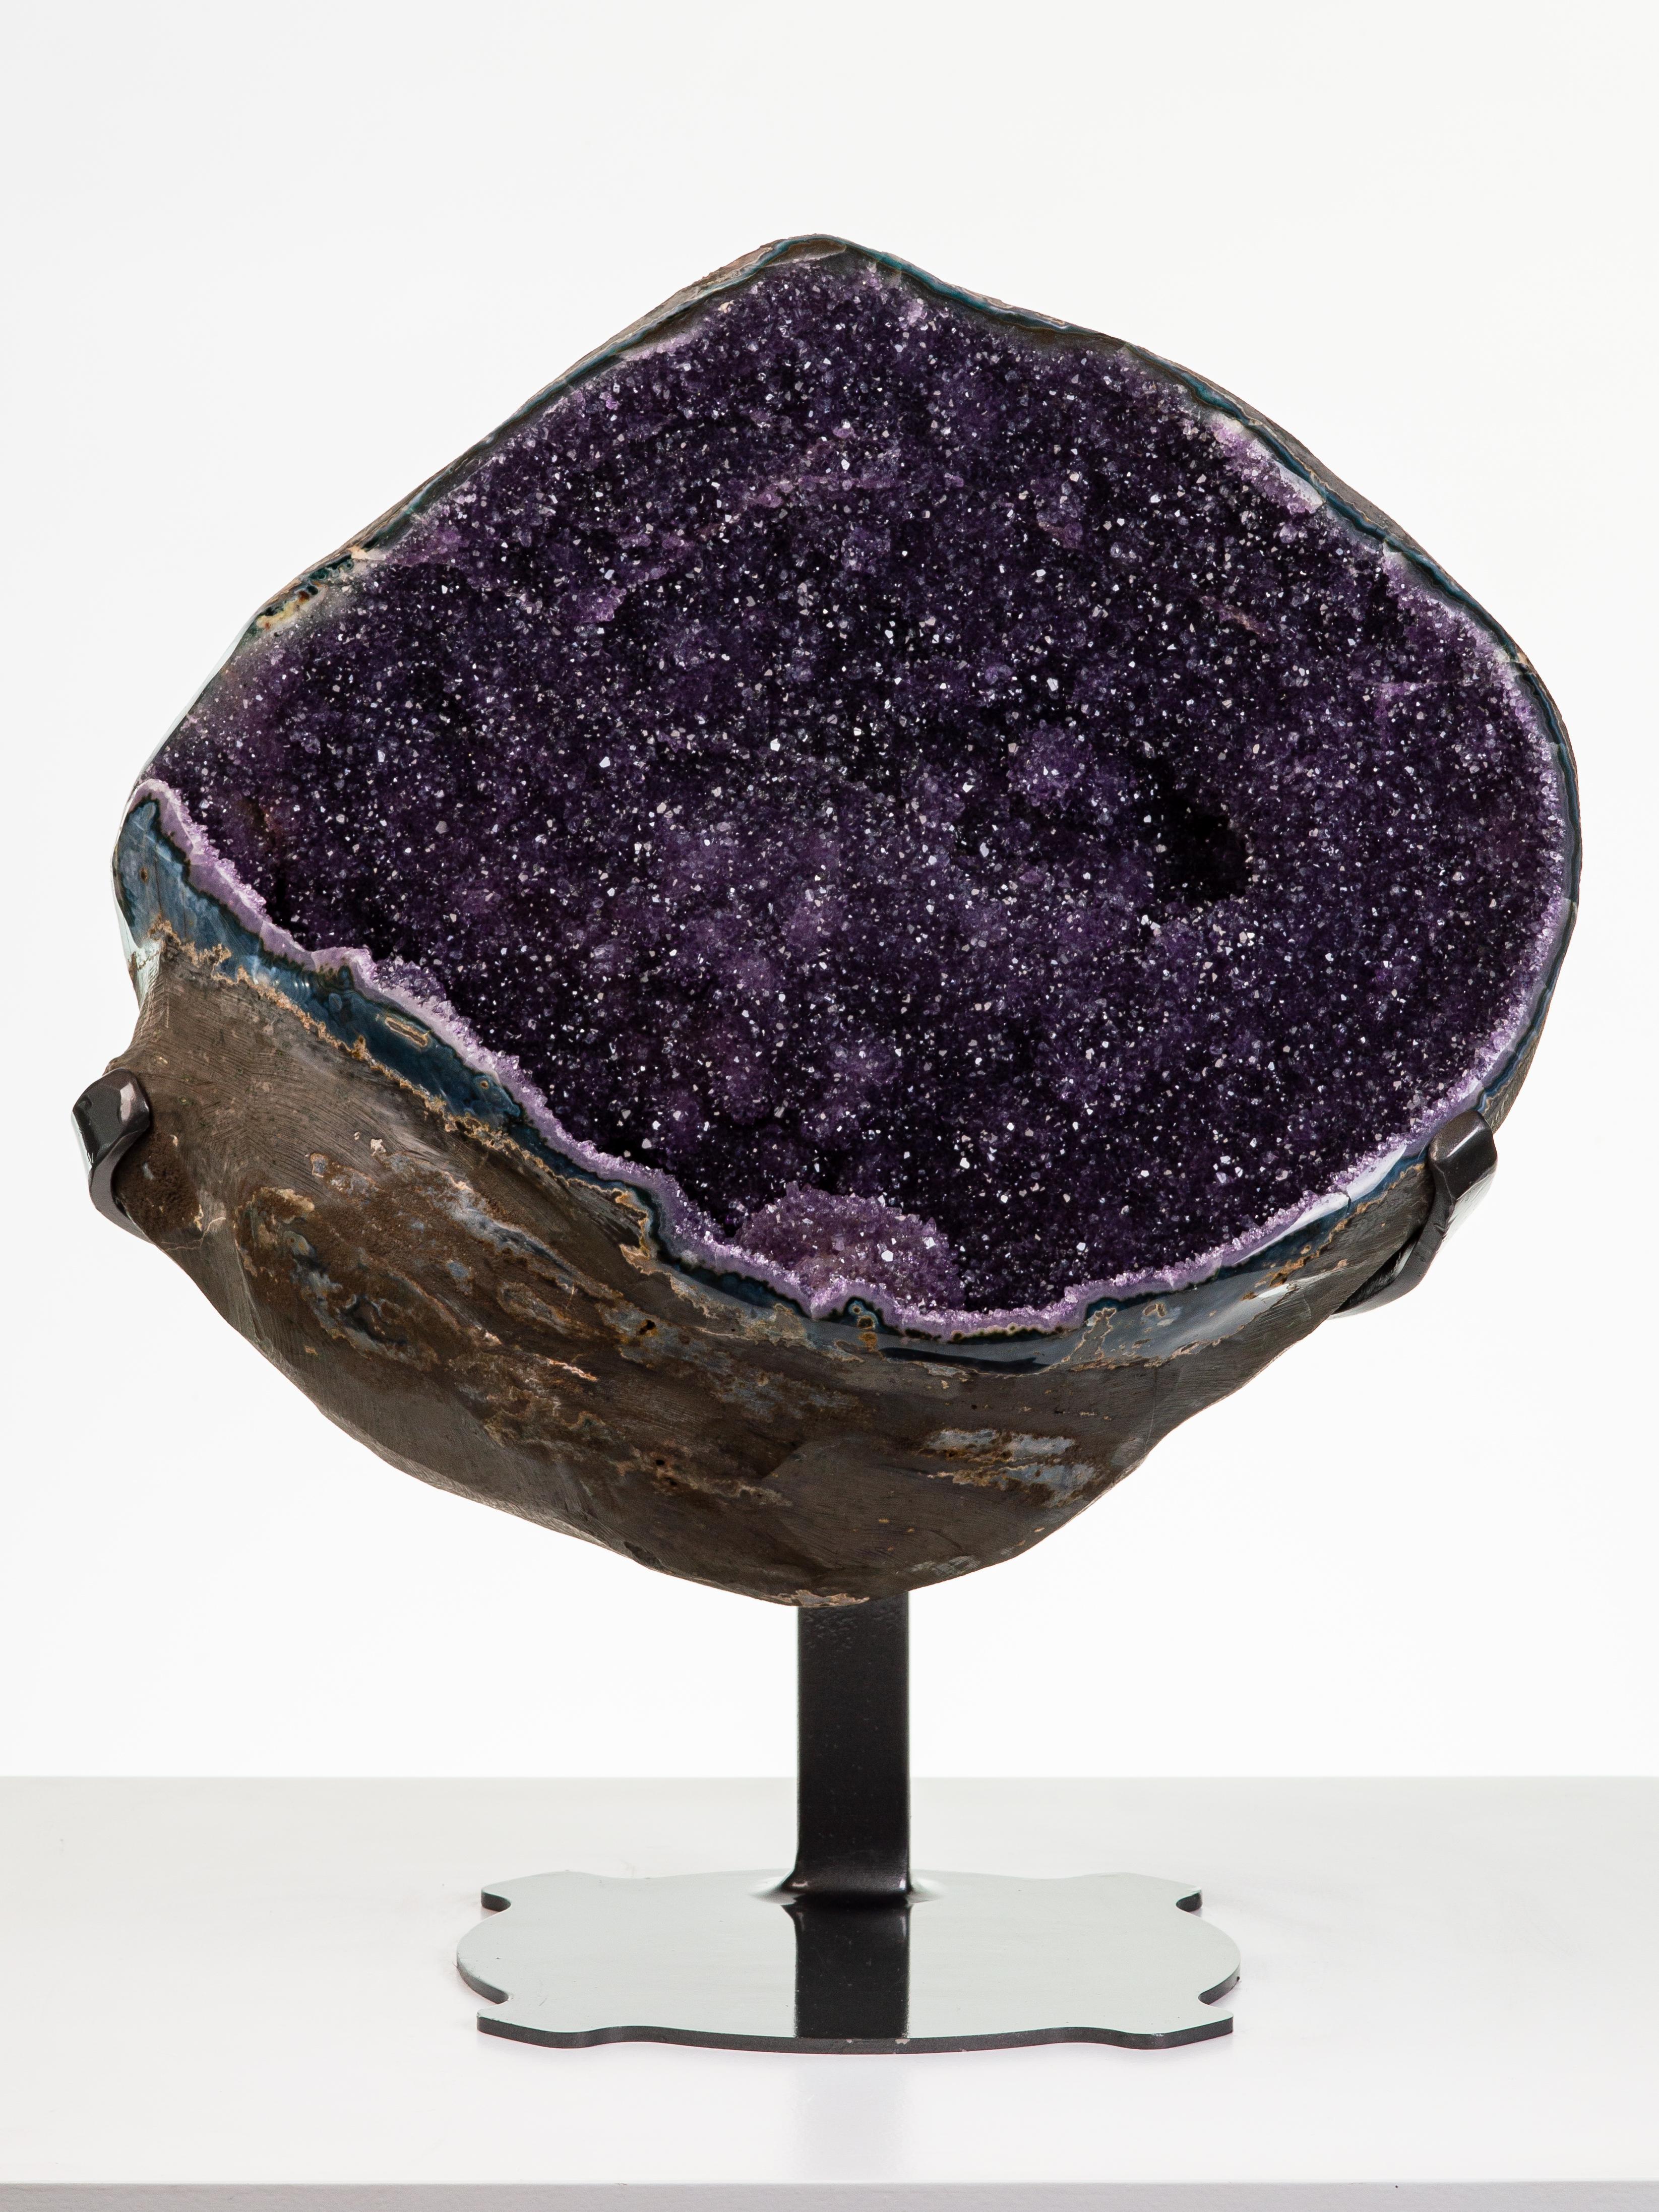 A wonderful and substantial spherical geode is shown here, with deep purple
amethyst crystals enveloping a central calcite. A quintessential geode and a
striking display piece.

This piece was legally and ethically sourced directly in the